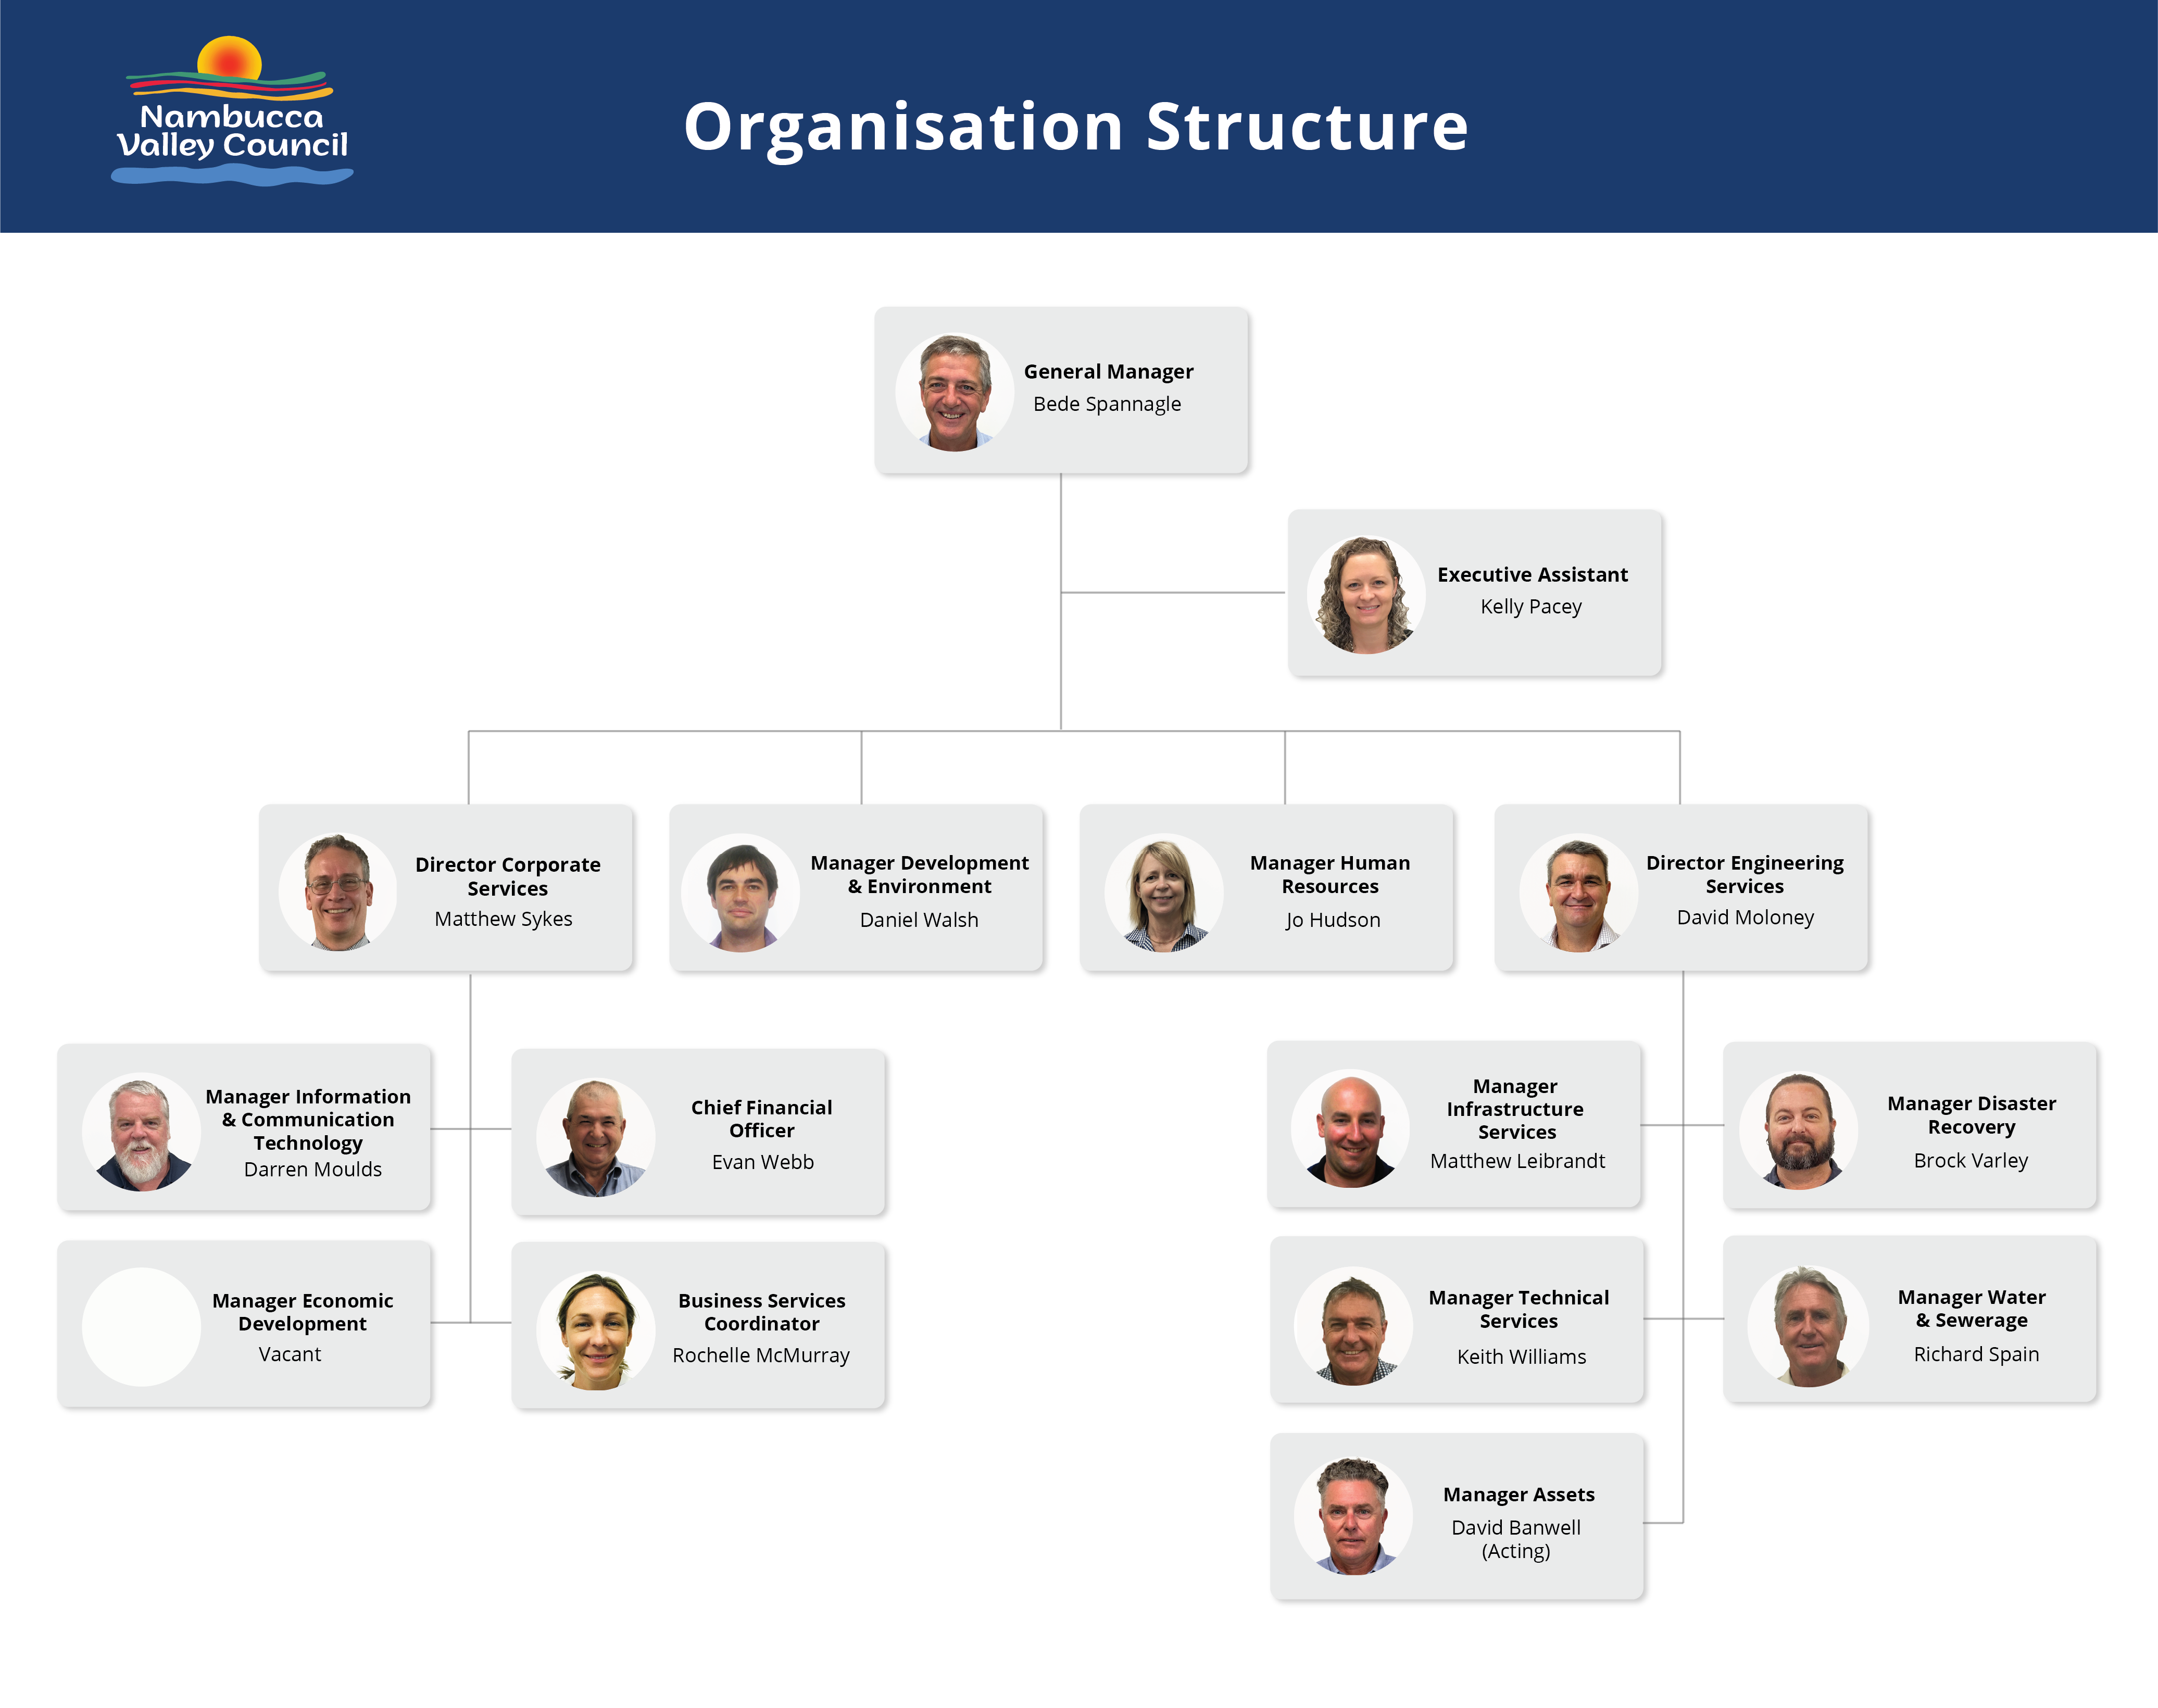 NVC-Organisation-Structure.png